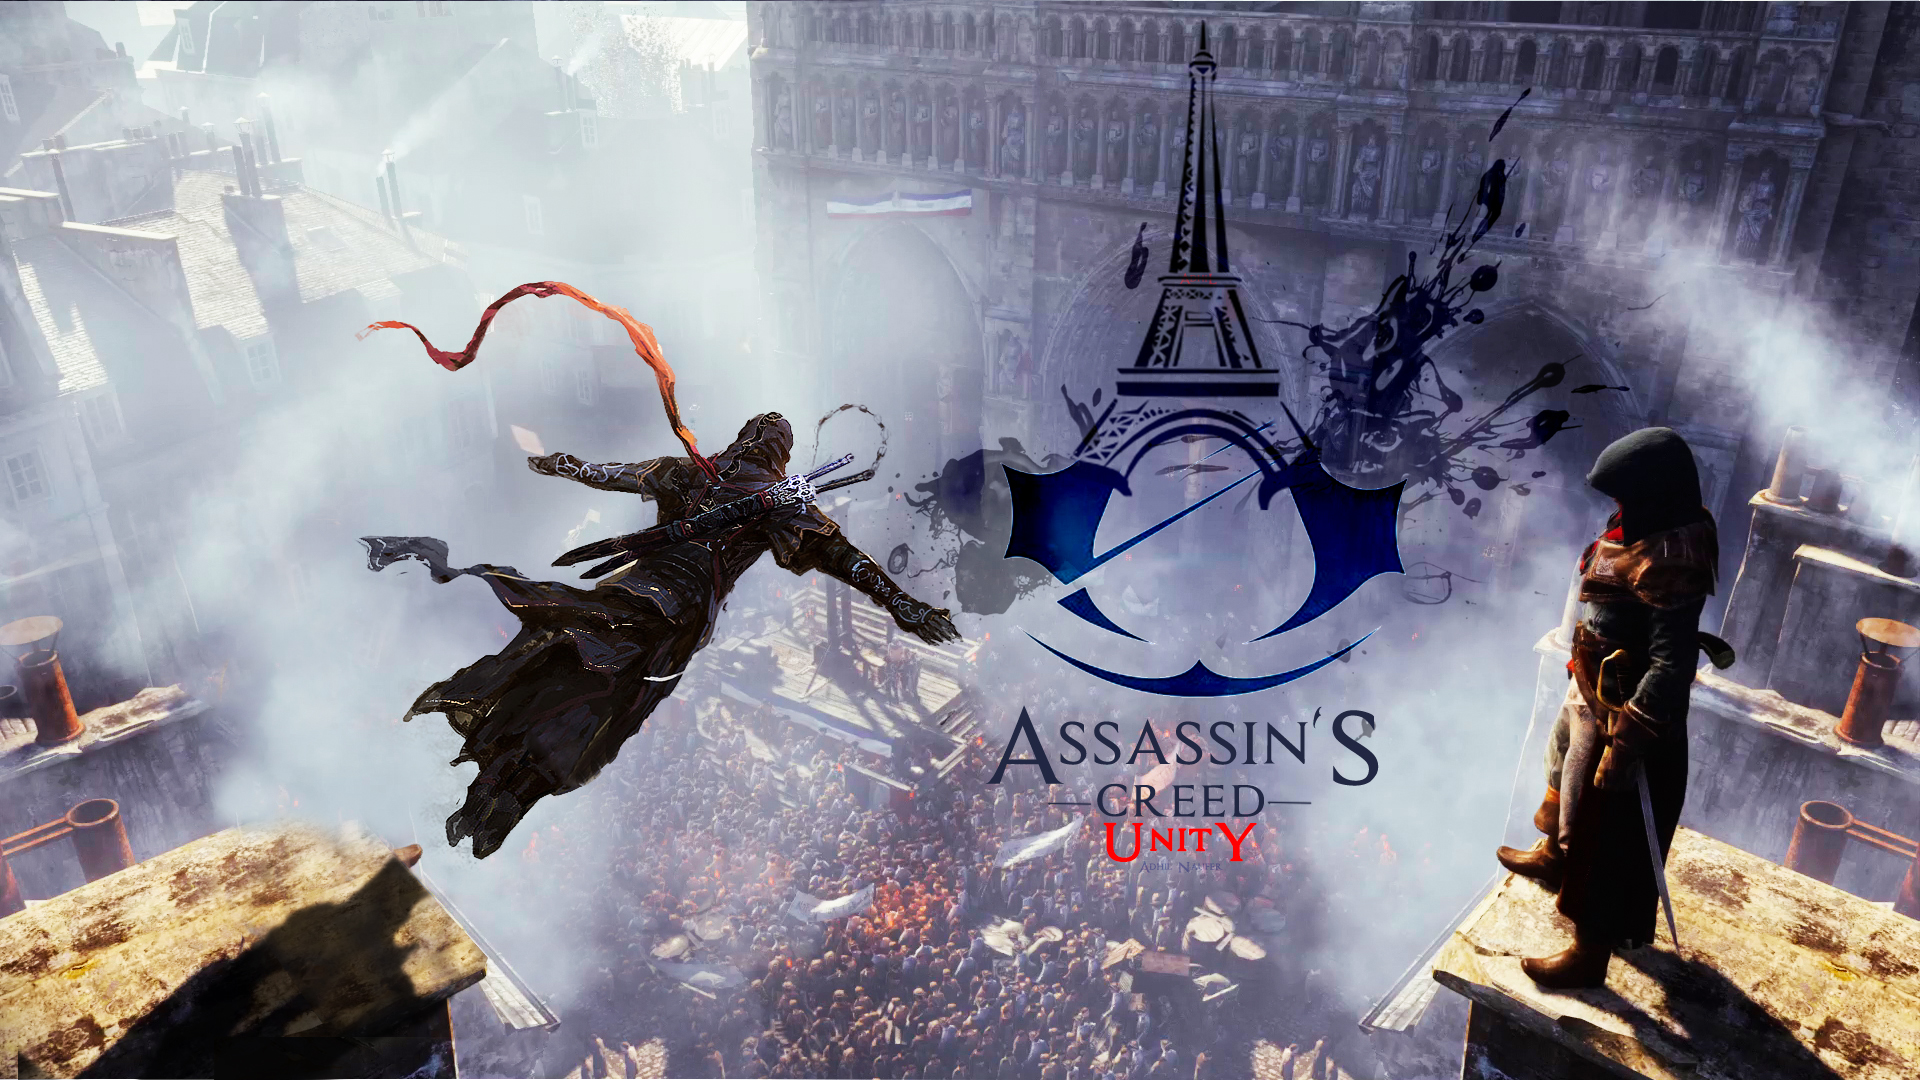 assassin's creed: unity, video game, assassin's creed 4K Ultra